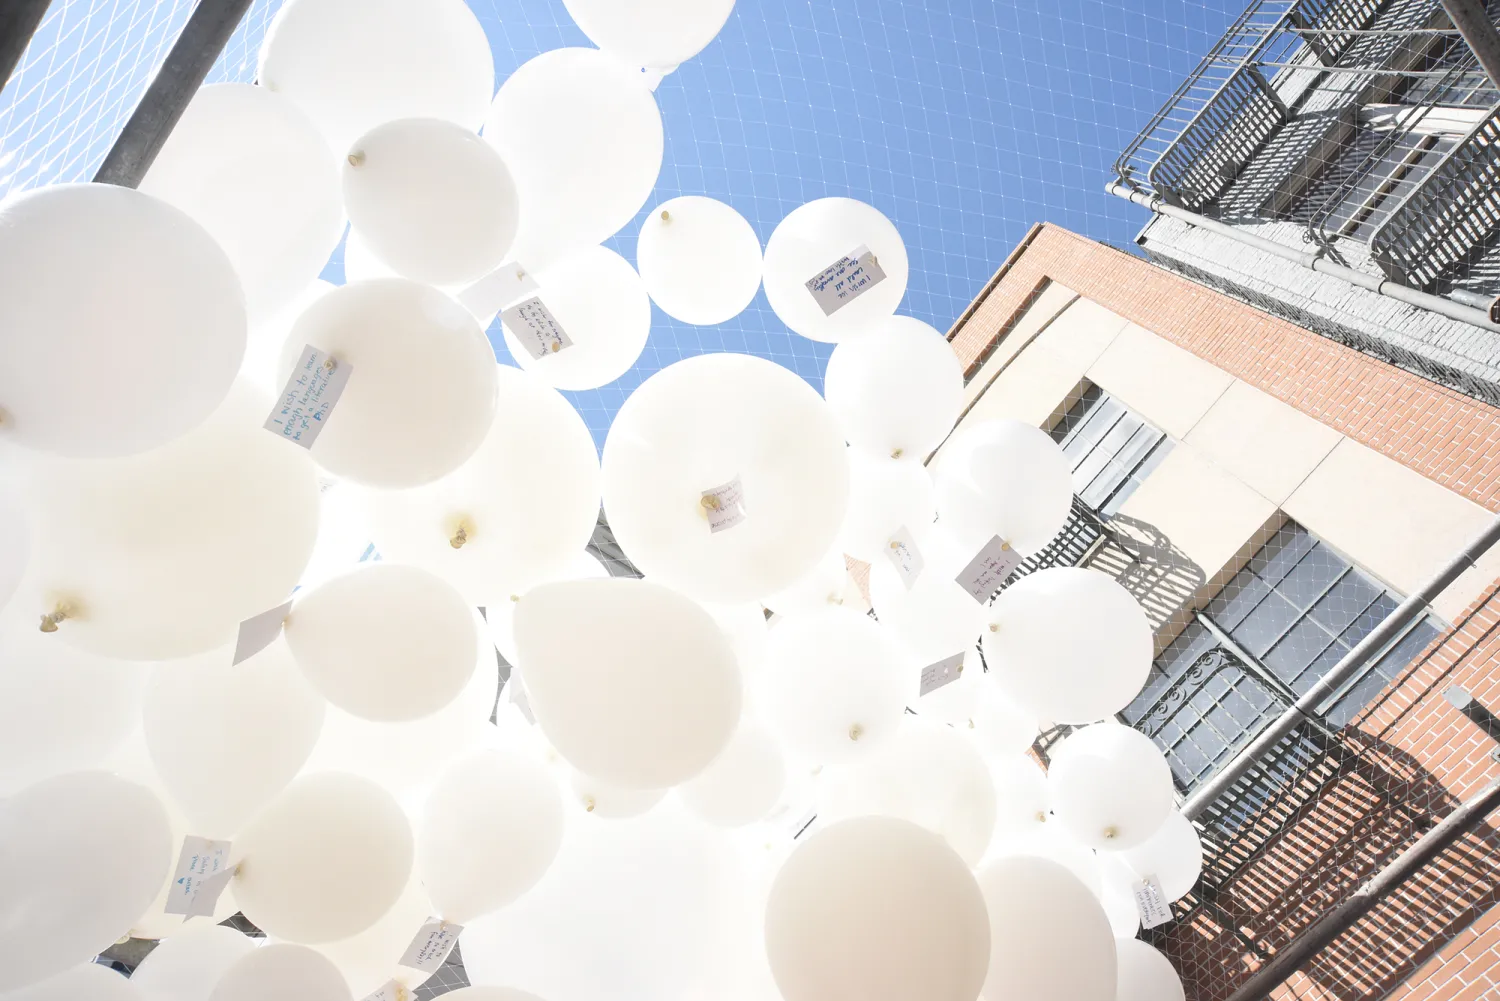 Looking up at the white balloons for Wishing Cloud.